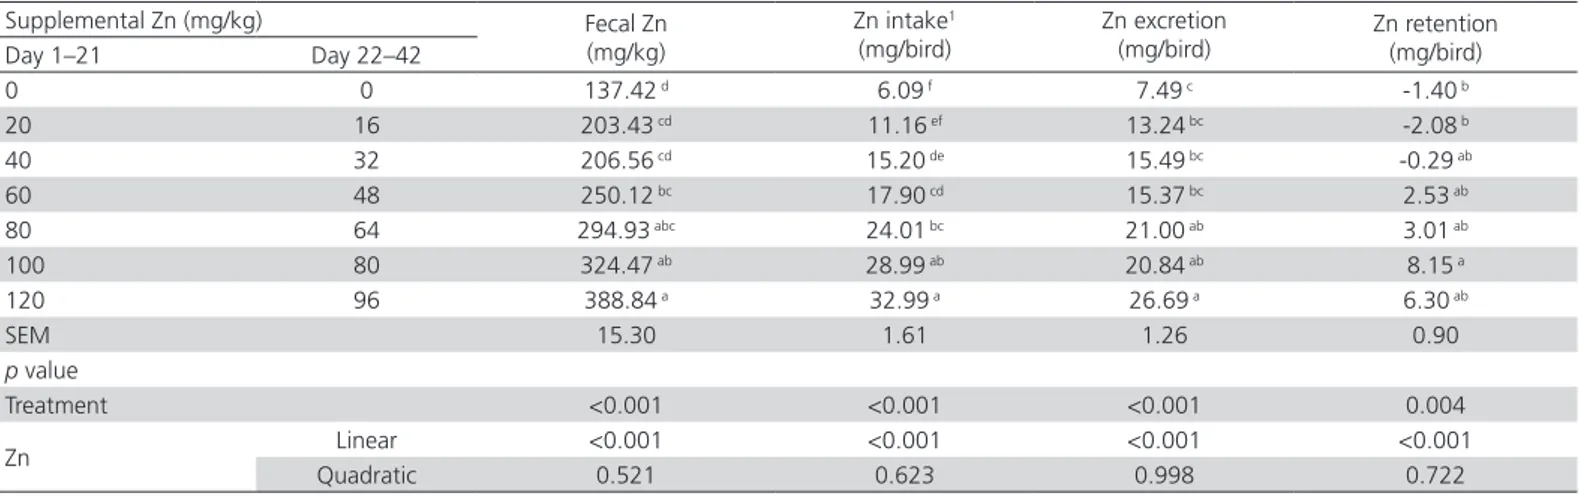 Table 5 – Effects of supplemental Zn levels on fecal Zn and Zn retention of 31- to 33-d-old broilers based on the Zn levels  analyzed in the feeds and feces.